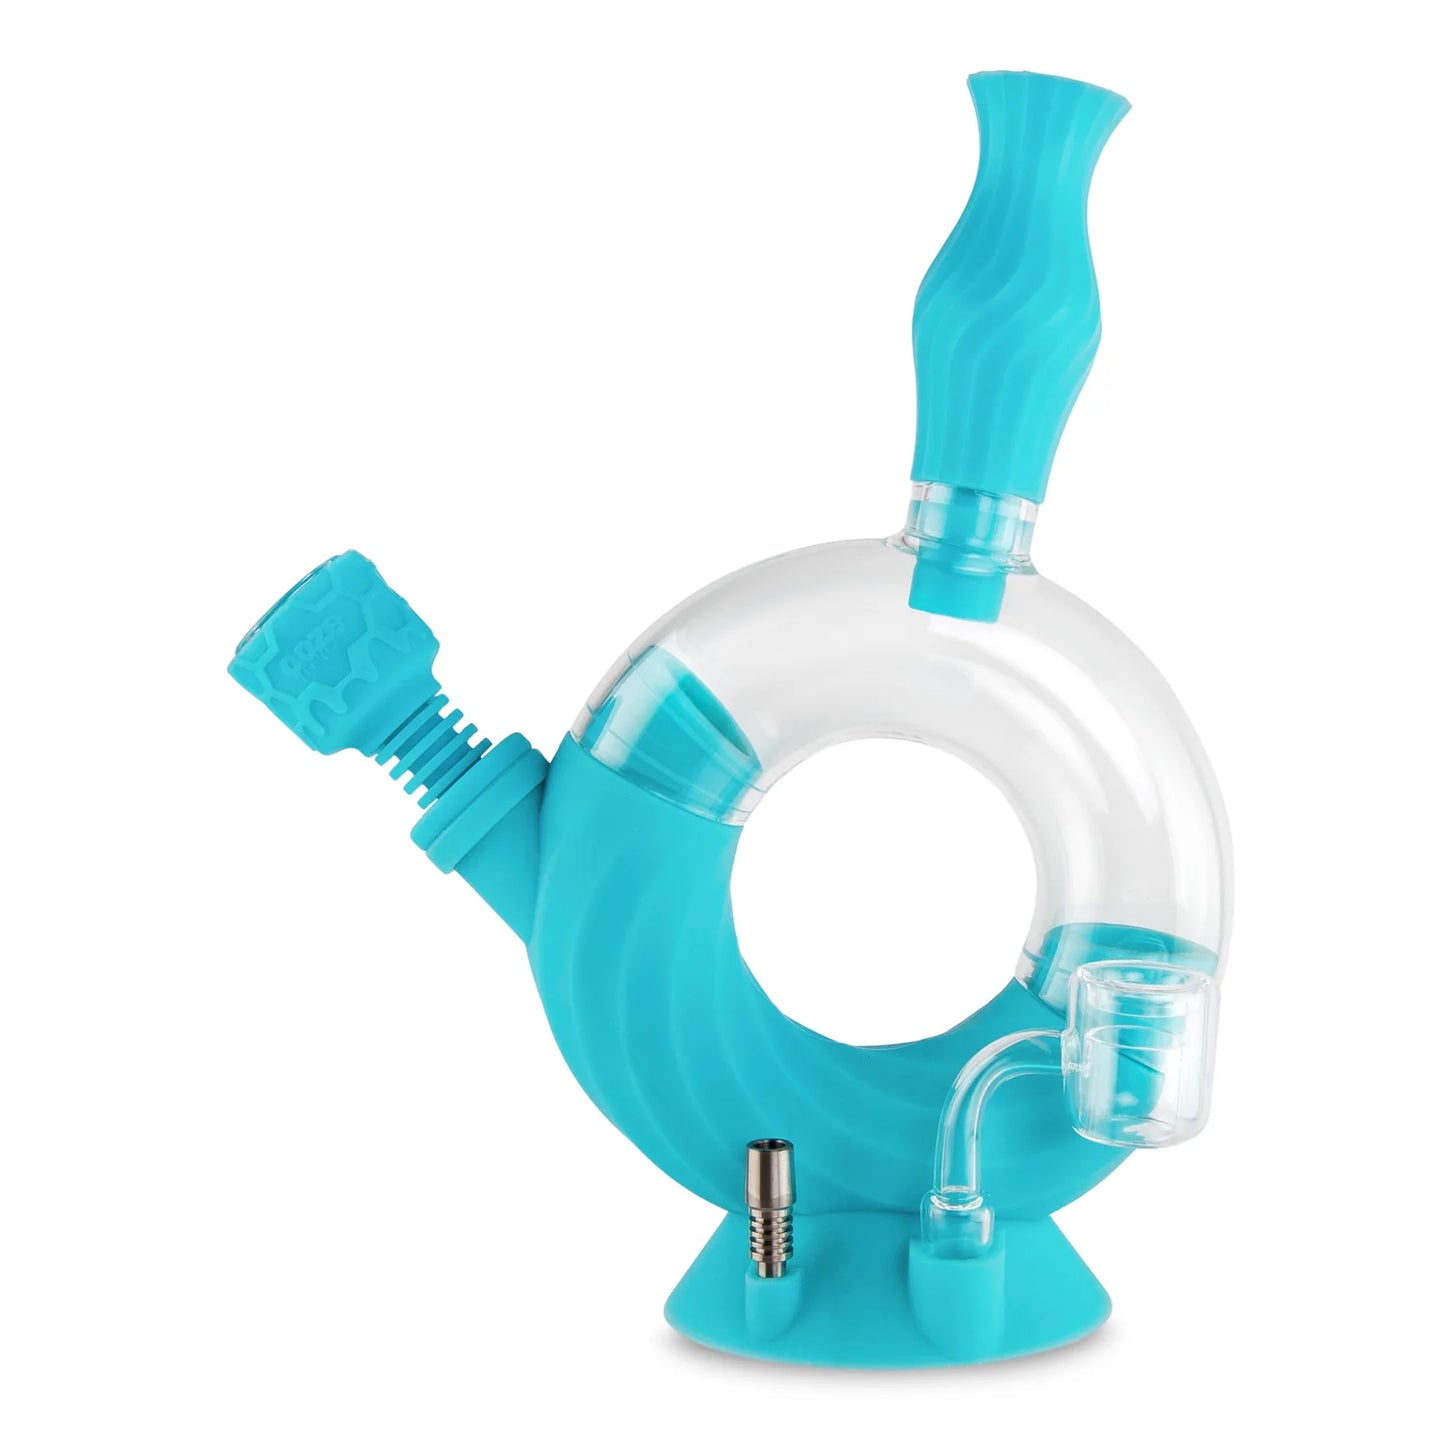 OOZE OZONE SILICONE WATER PIPE & NECTAR COLLECTOR - Aqua Teal